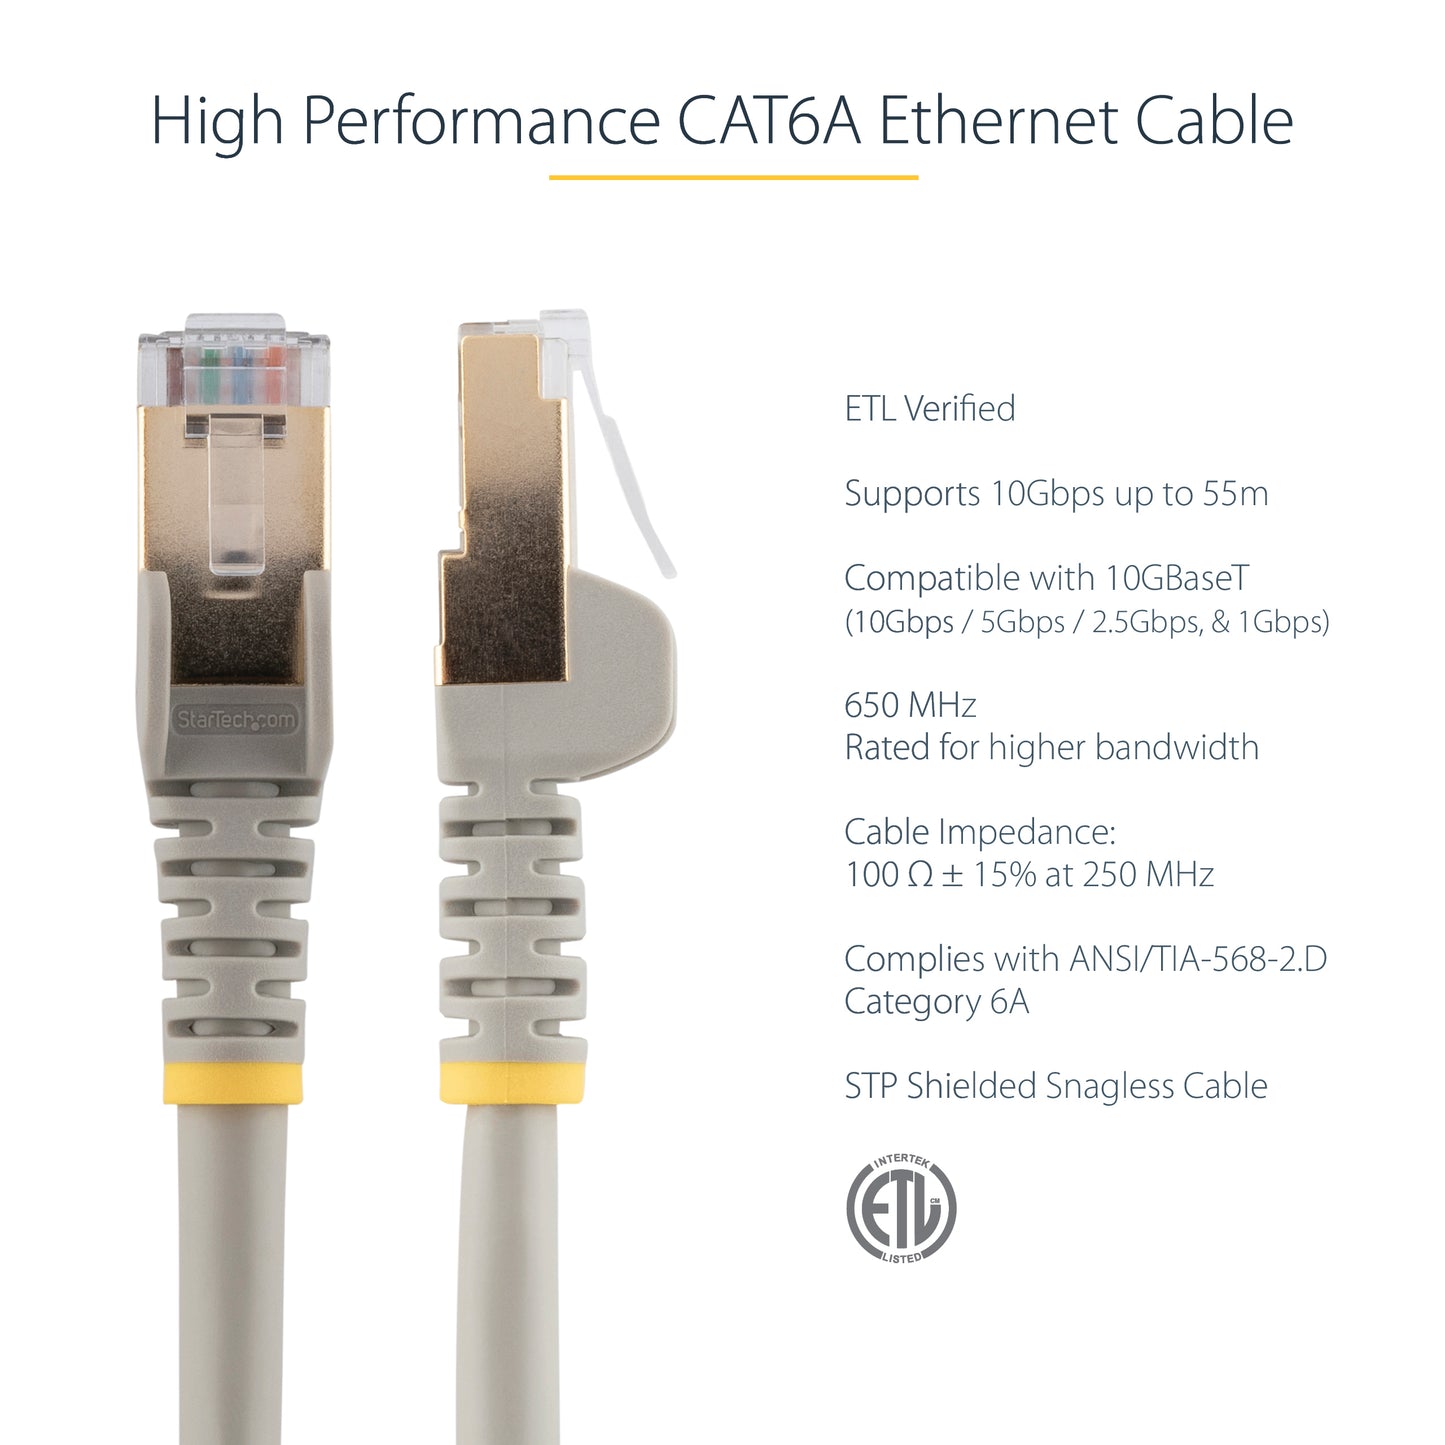 StarTech.com 3m CAT6a Ethernet Cable - 10 Gigabit Shielded Snagless RJ45 100W PoE Patch Cord - 10GbE STP Network Cable w/Strain Relief - Grey Fluke Tested/Wiring is UL Certified/TIA-4